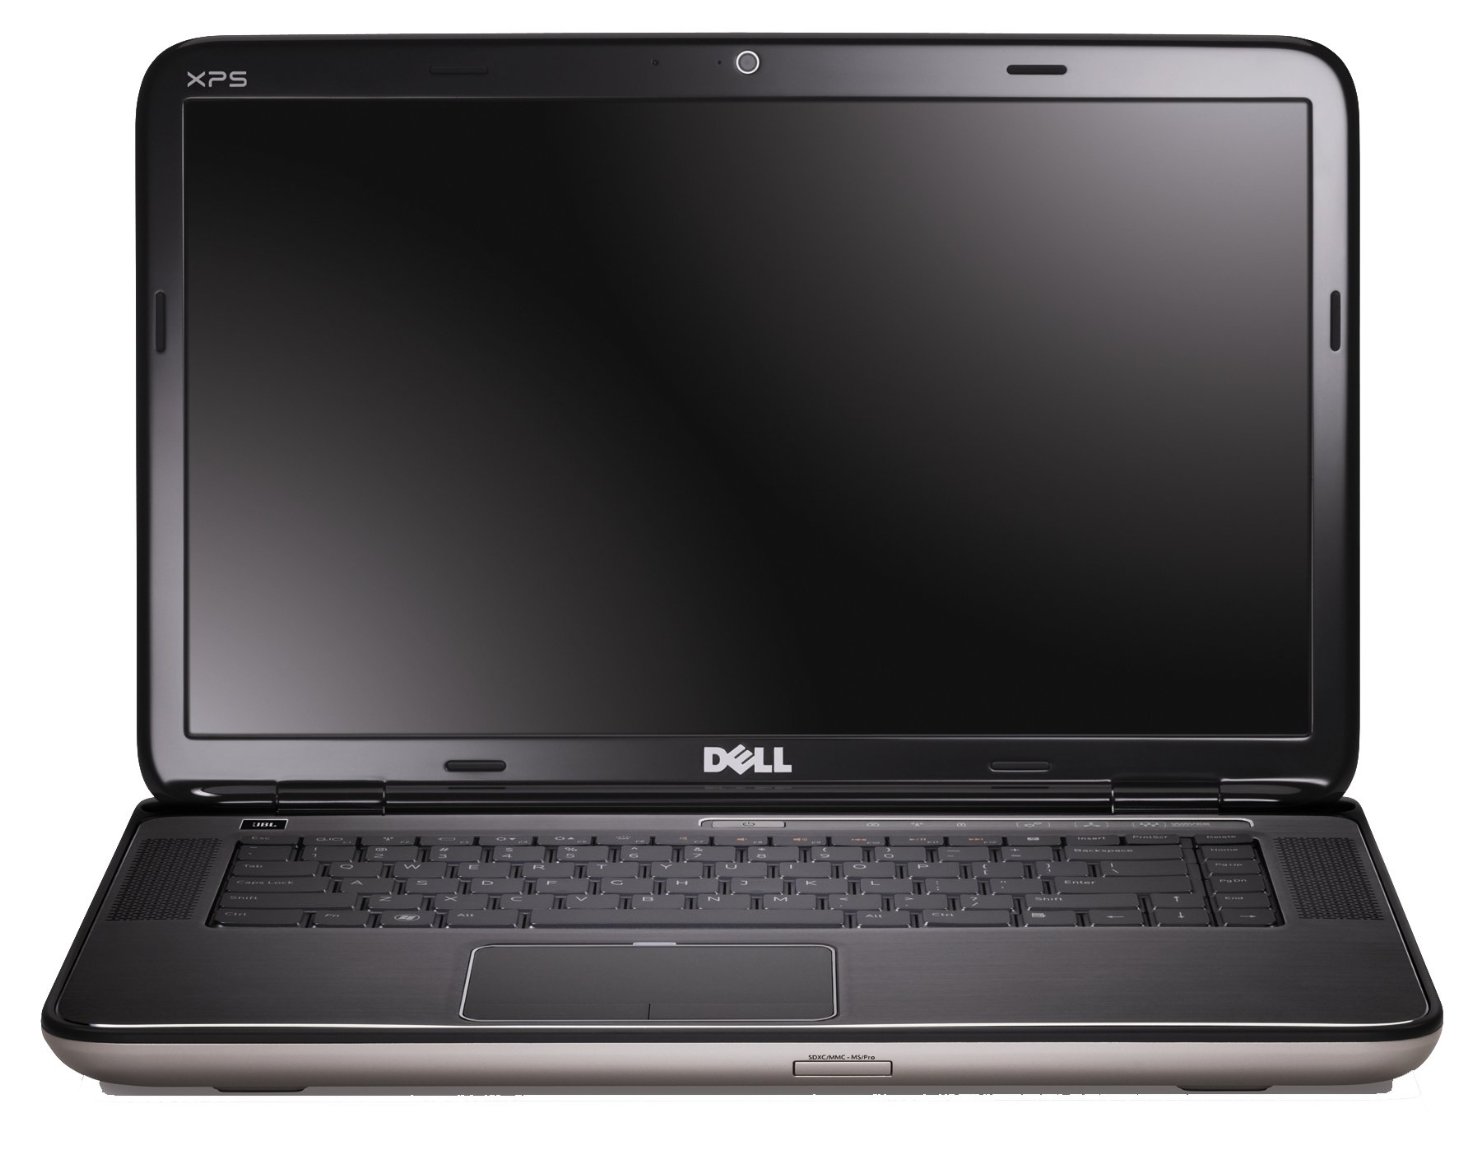   Dell XPS 15 (7590-6640)  1